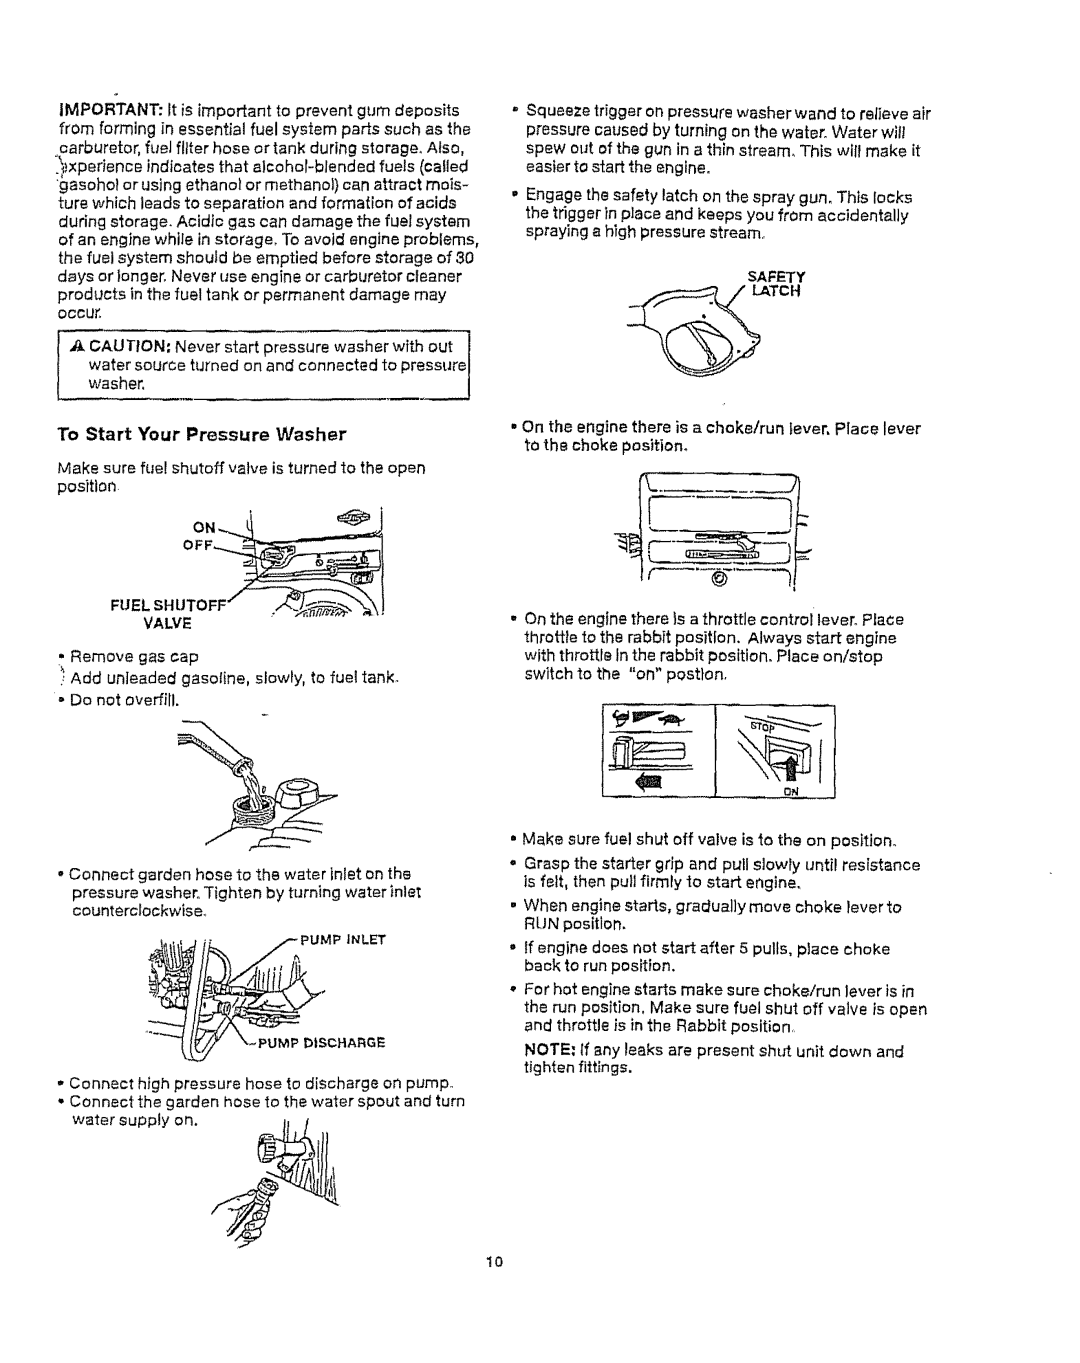 Craftsman 919.76902 manual To Start Your Pressure Washer, Valve, •Do not overfill, 0.-4 